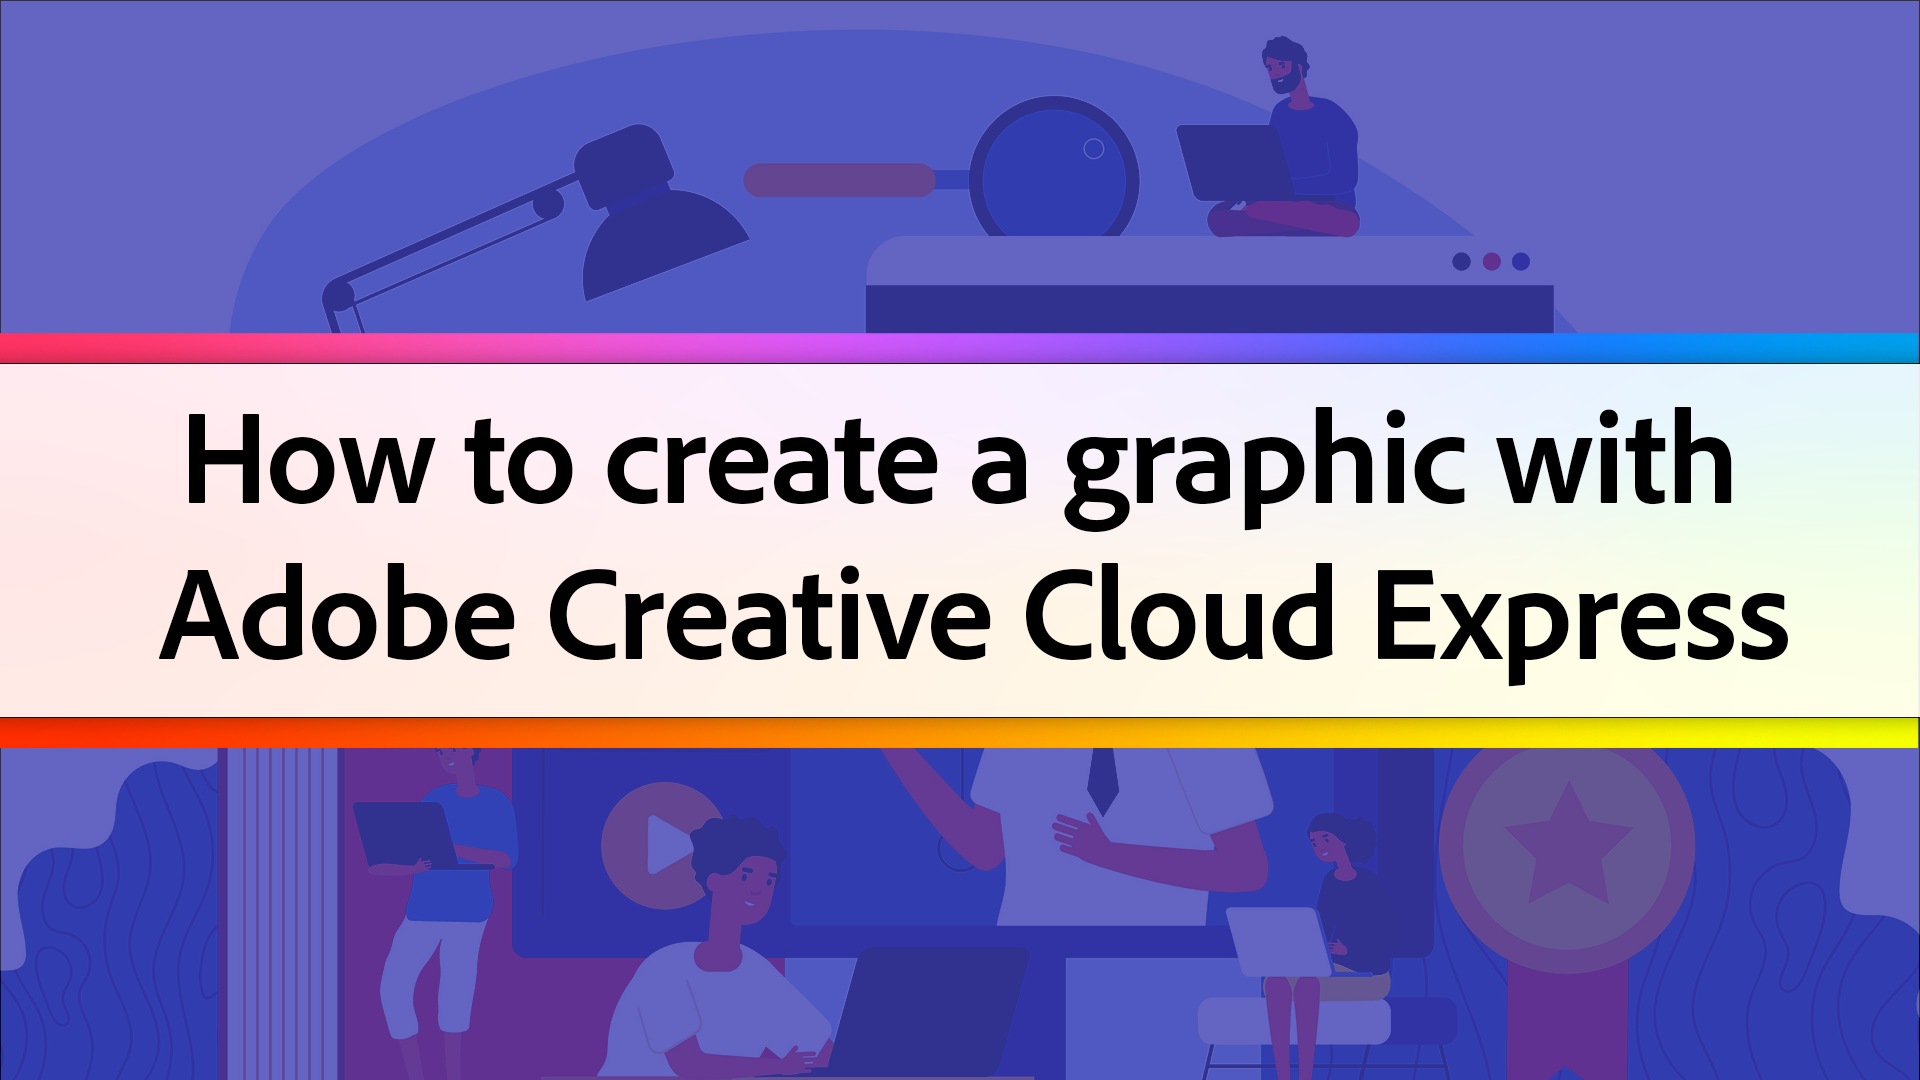 How to create a graphic